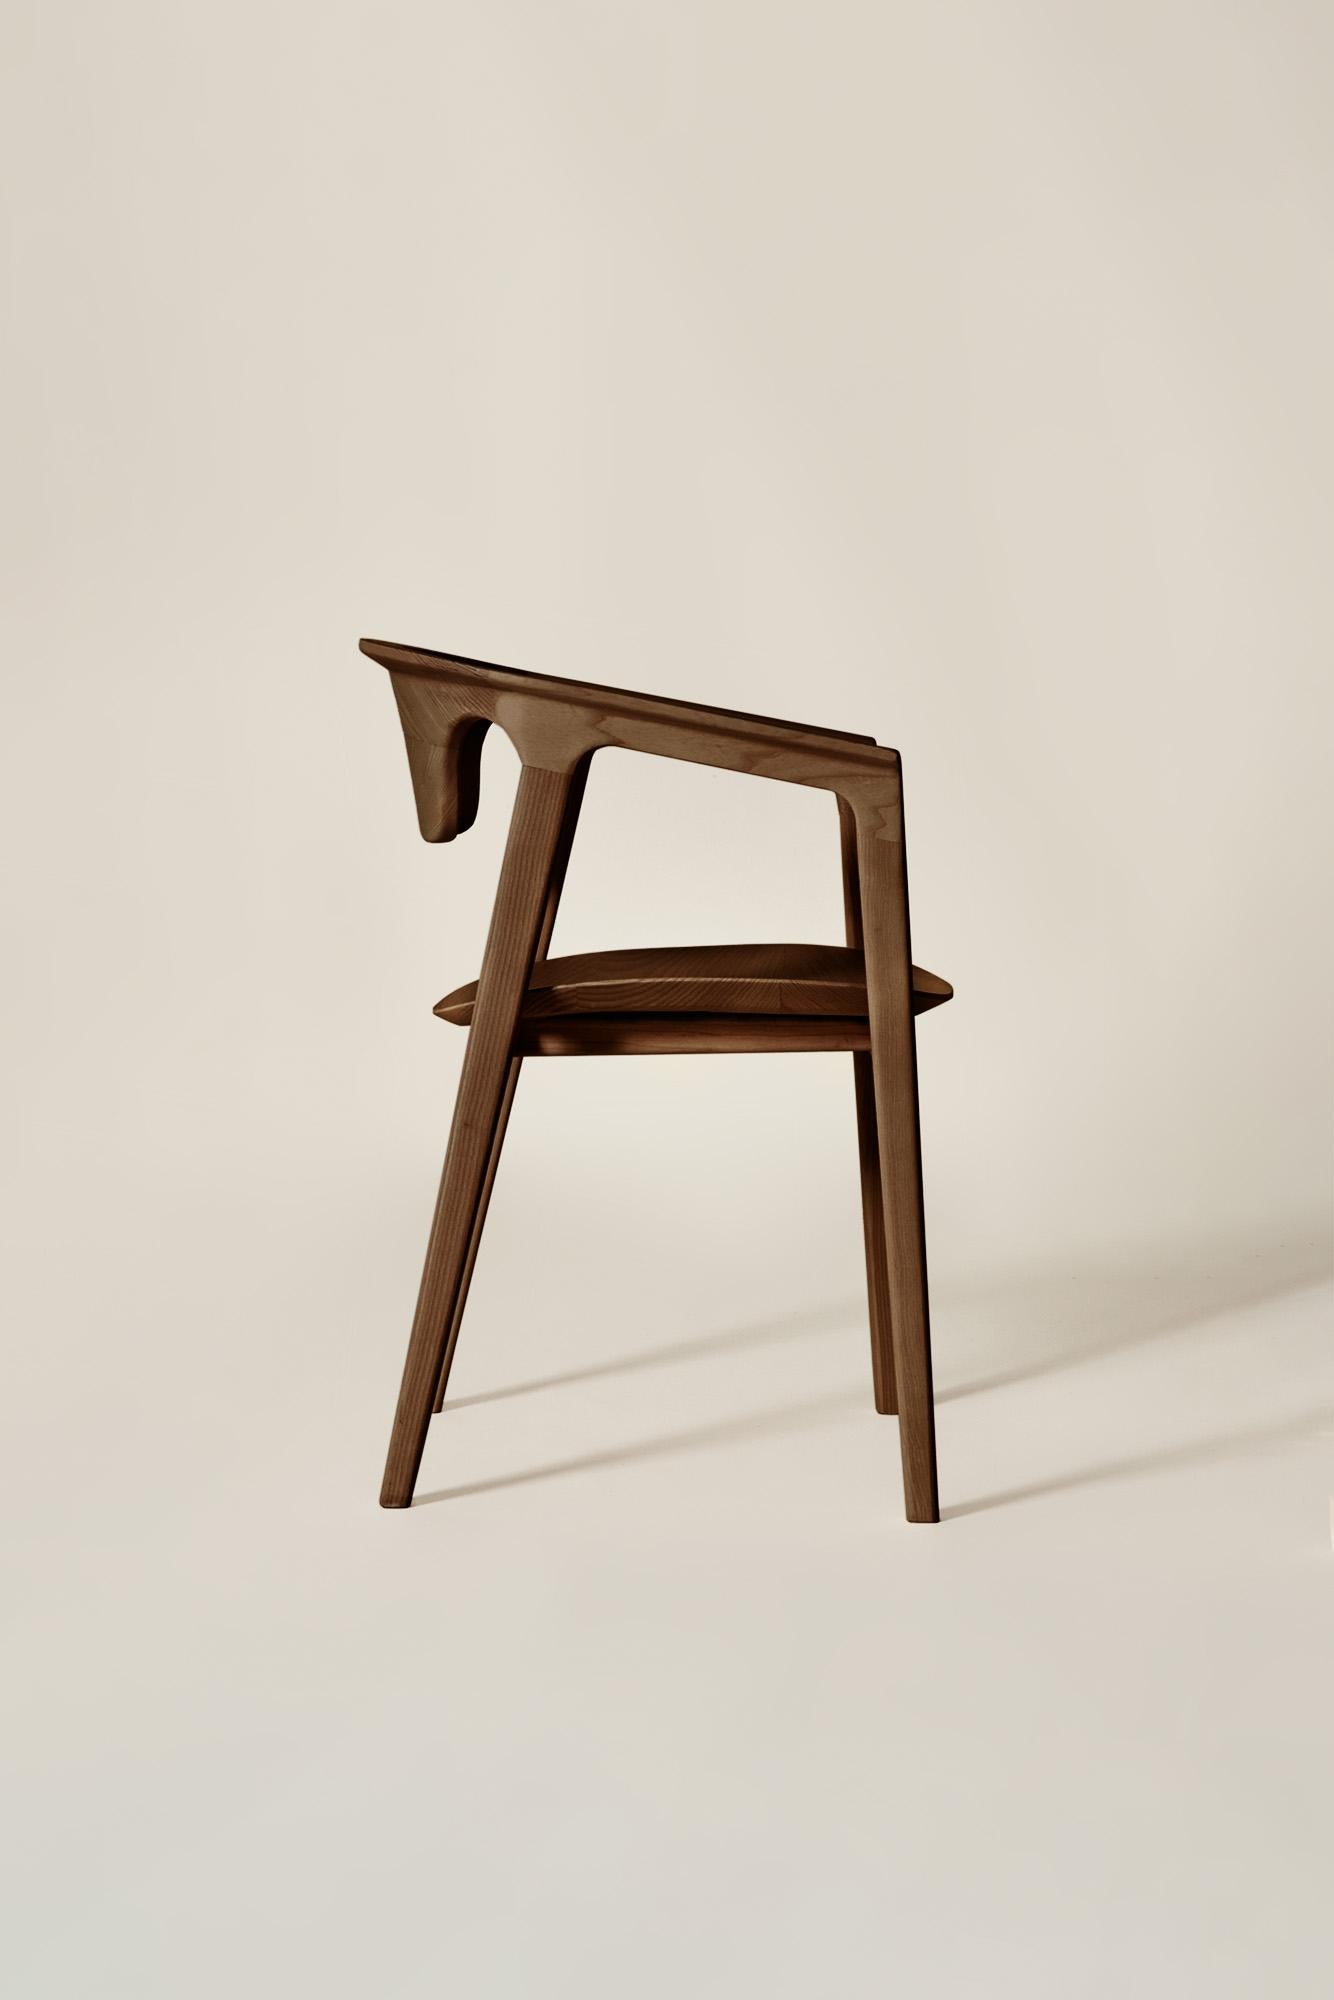 Modern Duna Solid Wood Chair, Ash in Hand-Made Brown Finish, Contemporary For Sale